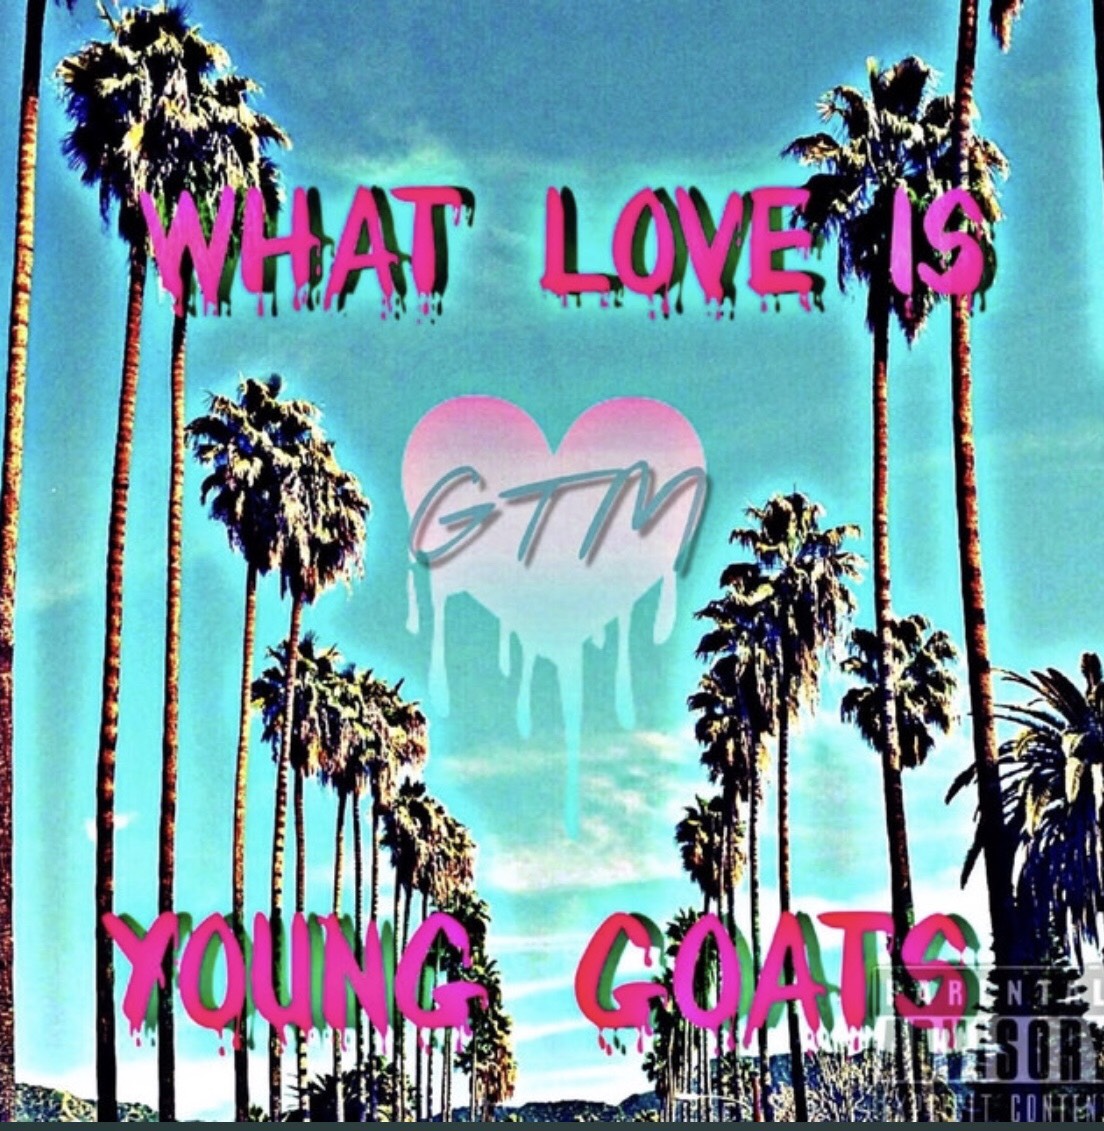 Young Goats – What Love Is